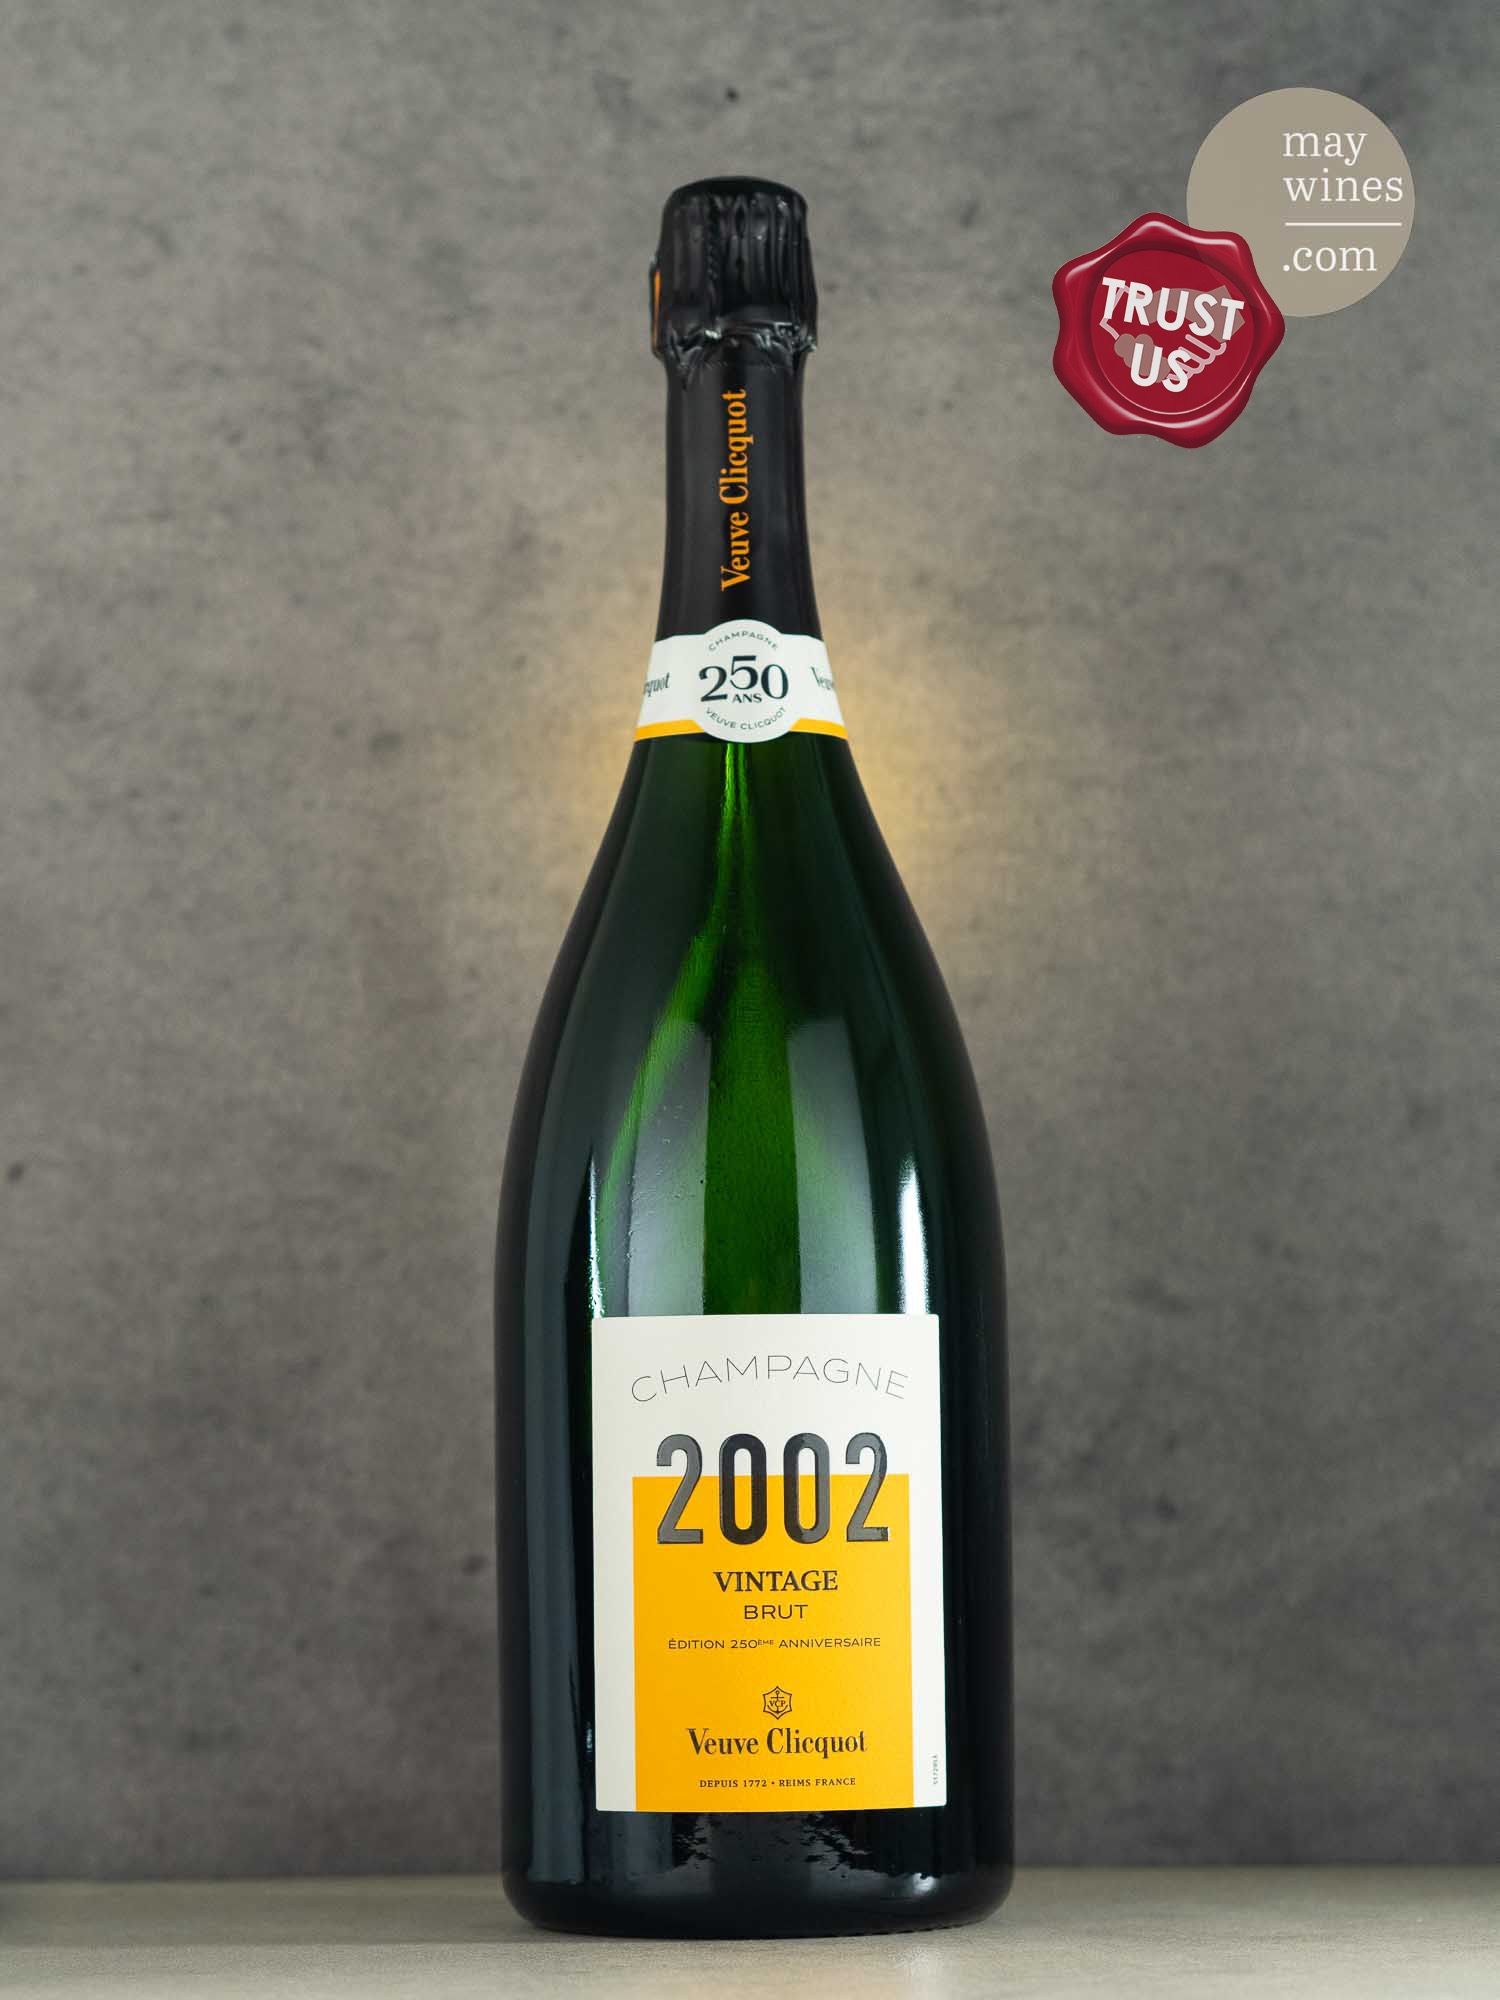 May Wines – Champagner – 2002 Vintage 250th Anniversary Edition - Veuve Clicquot